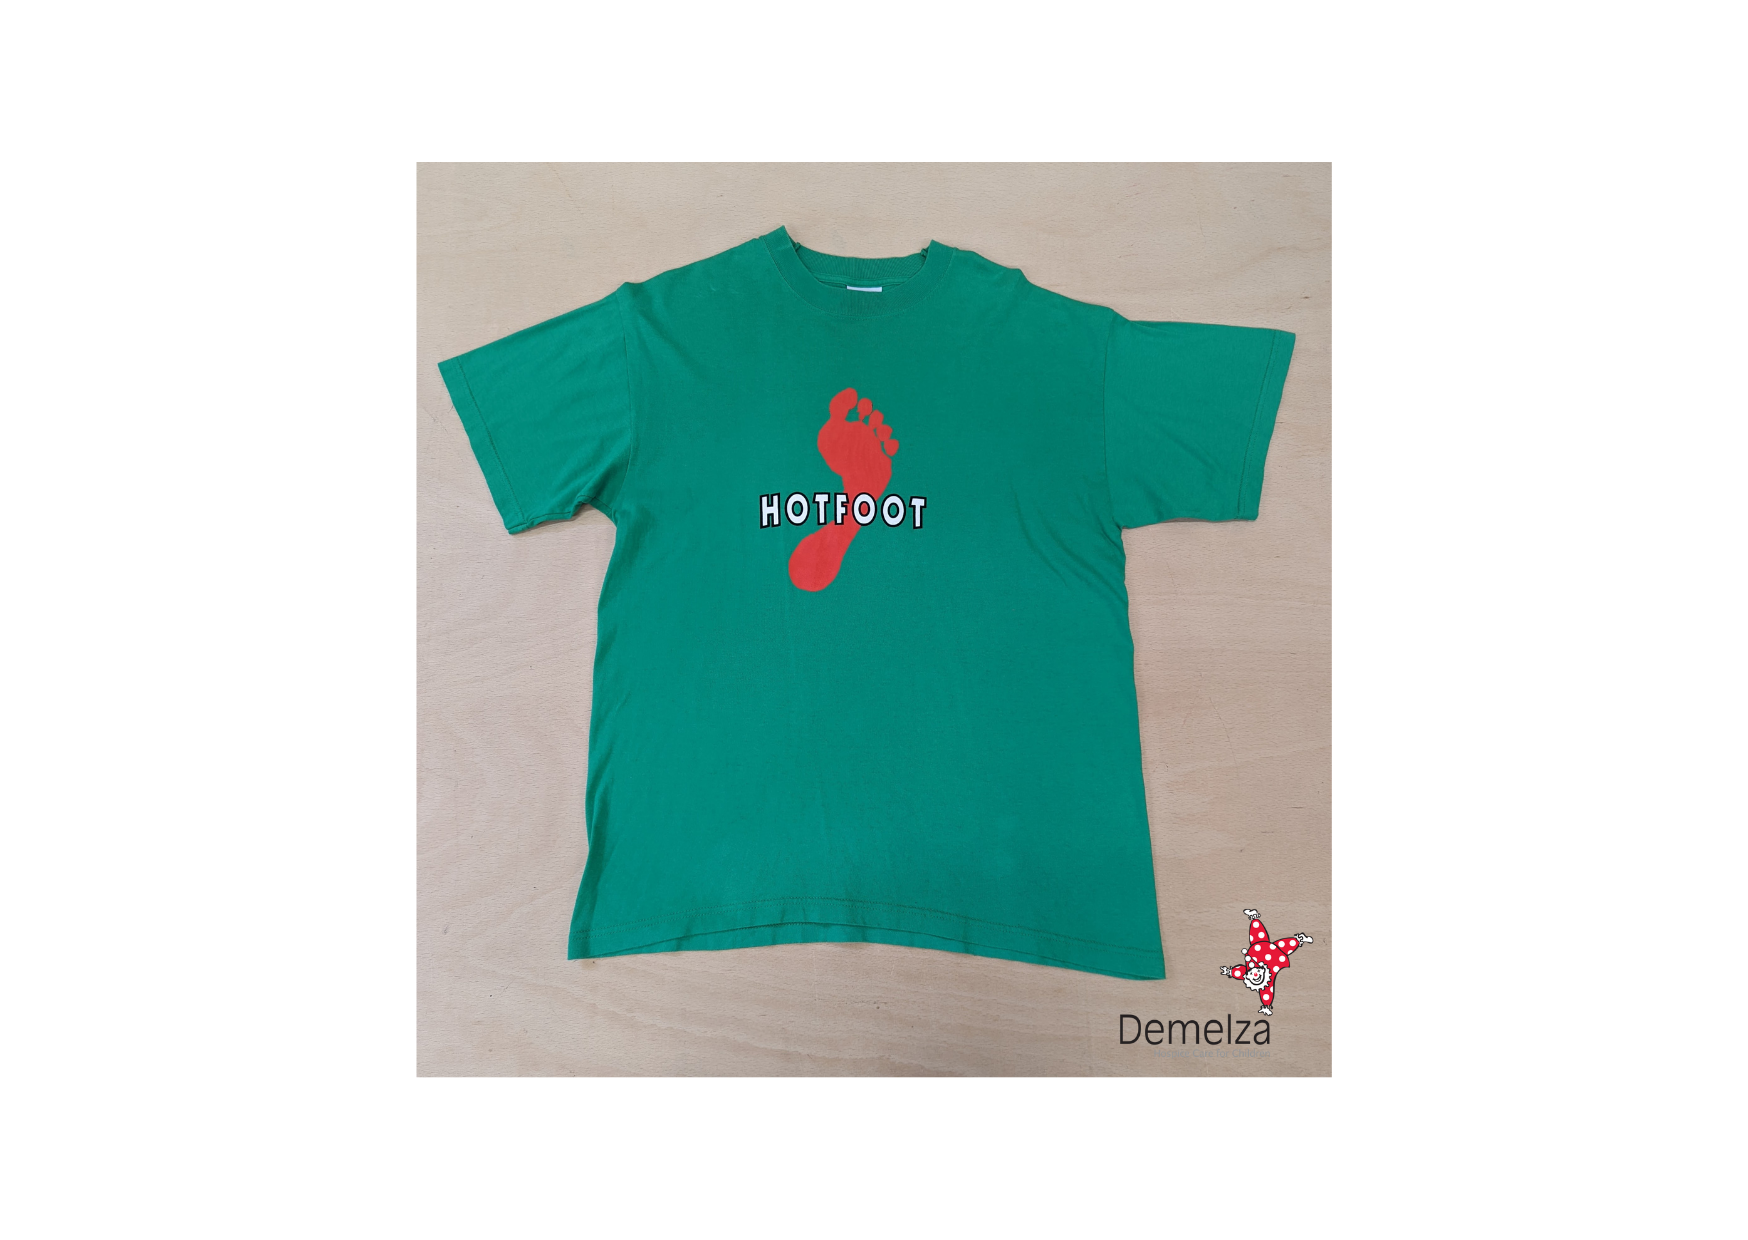 Green T shirt with red footprint graphic and "Hotfoot" spell out